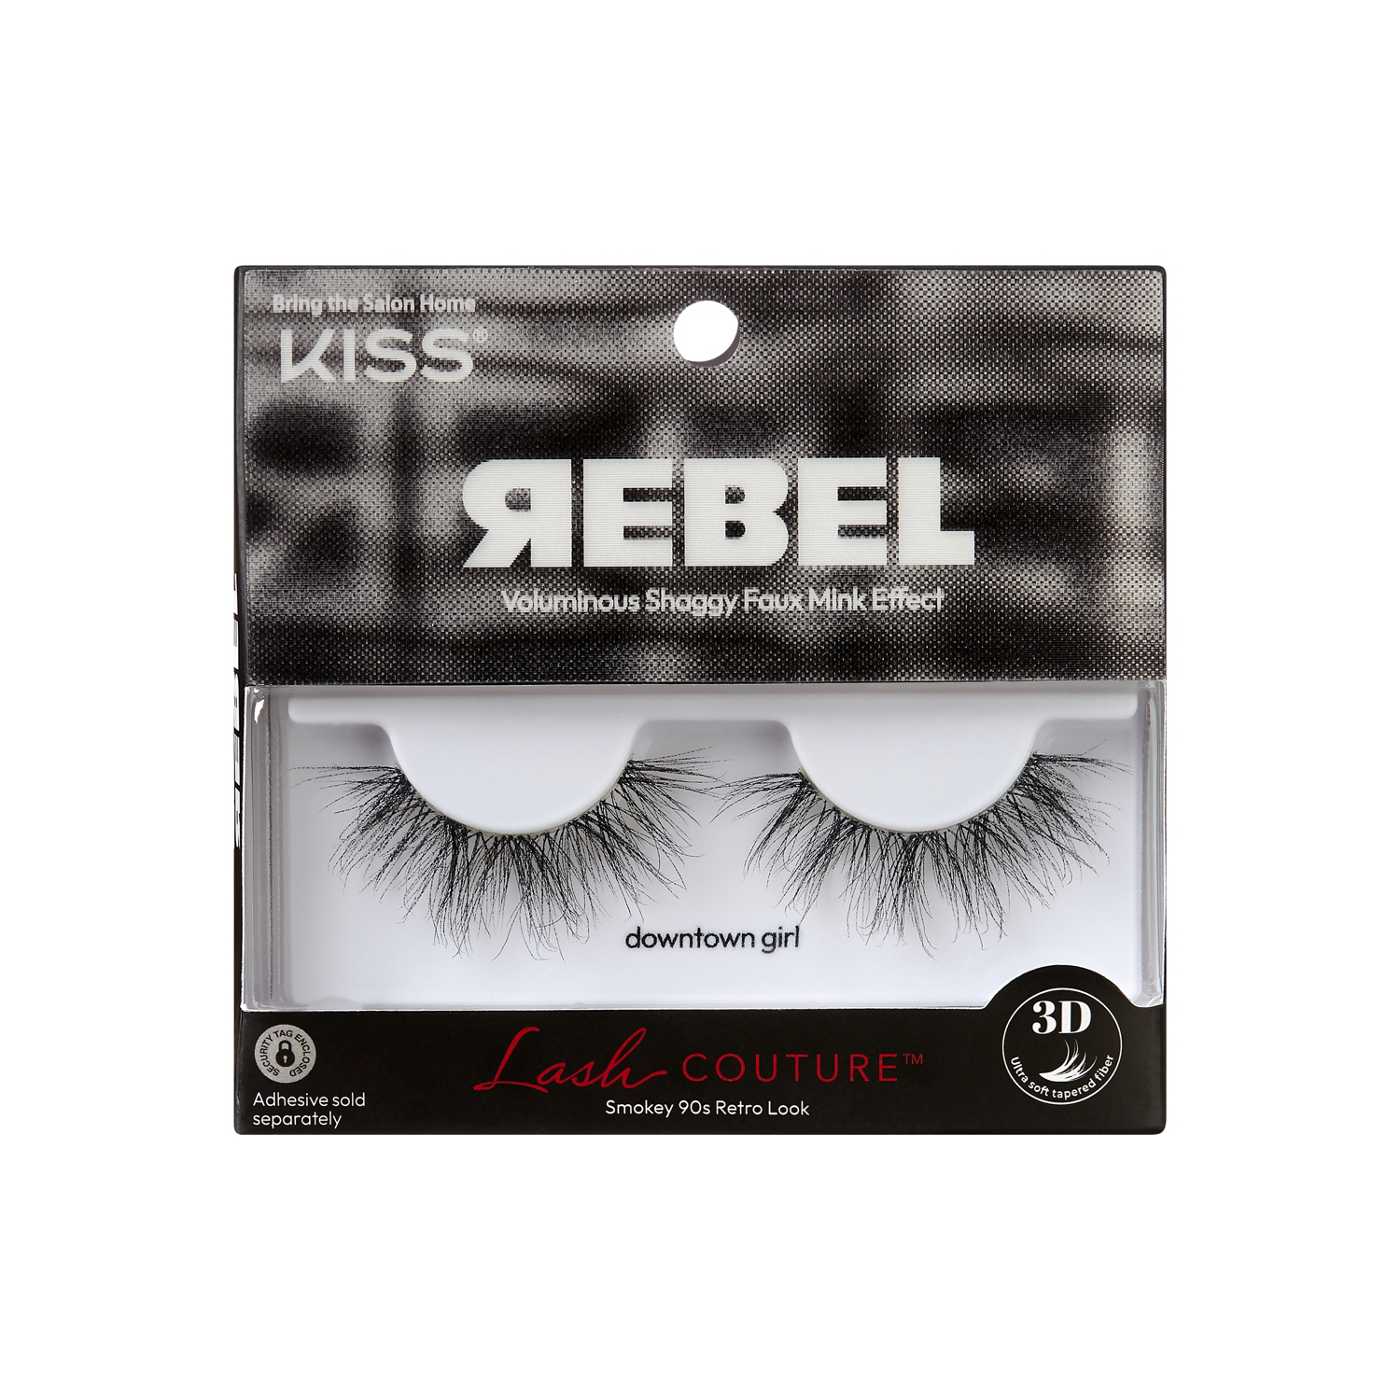 KISS Rebel Lash Couture Lashes - Downtown Girl ; image 1 of 5